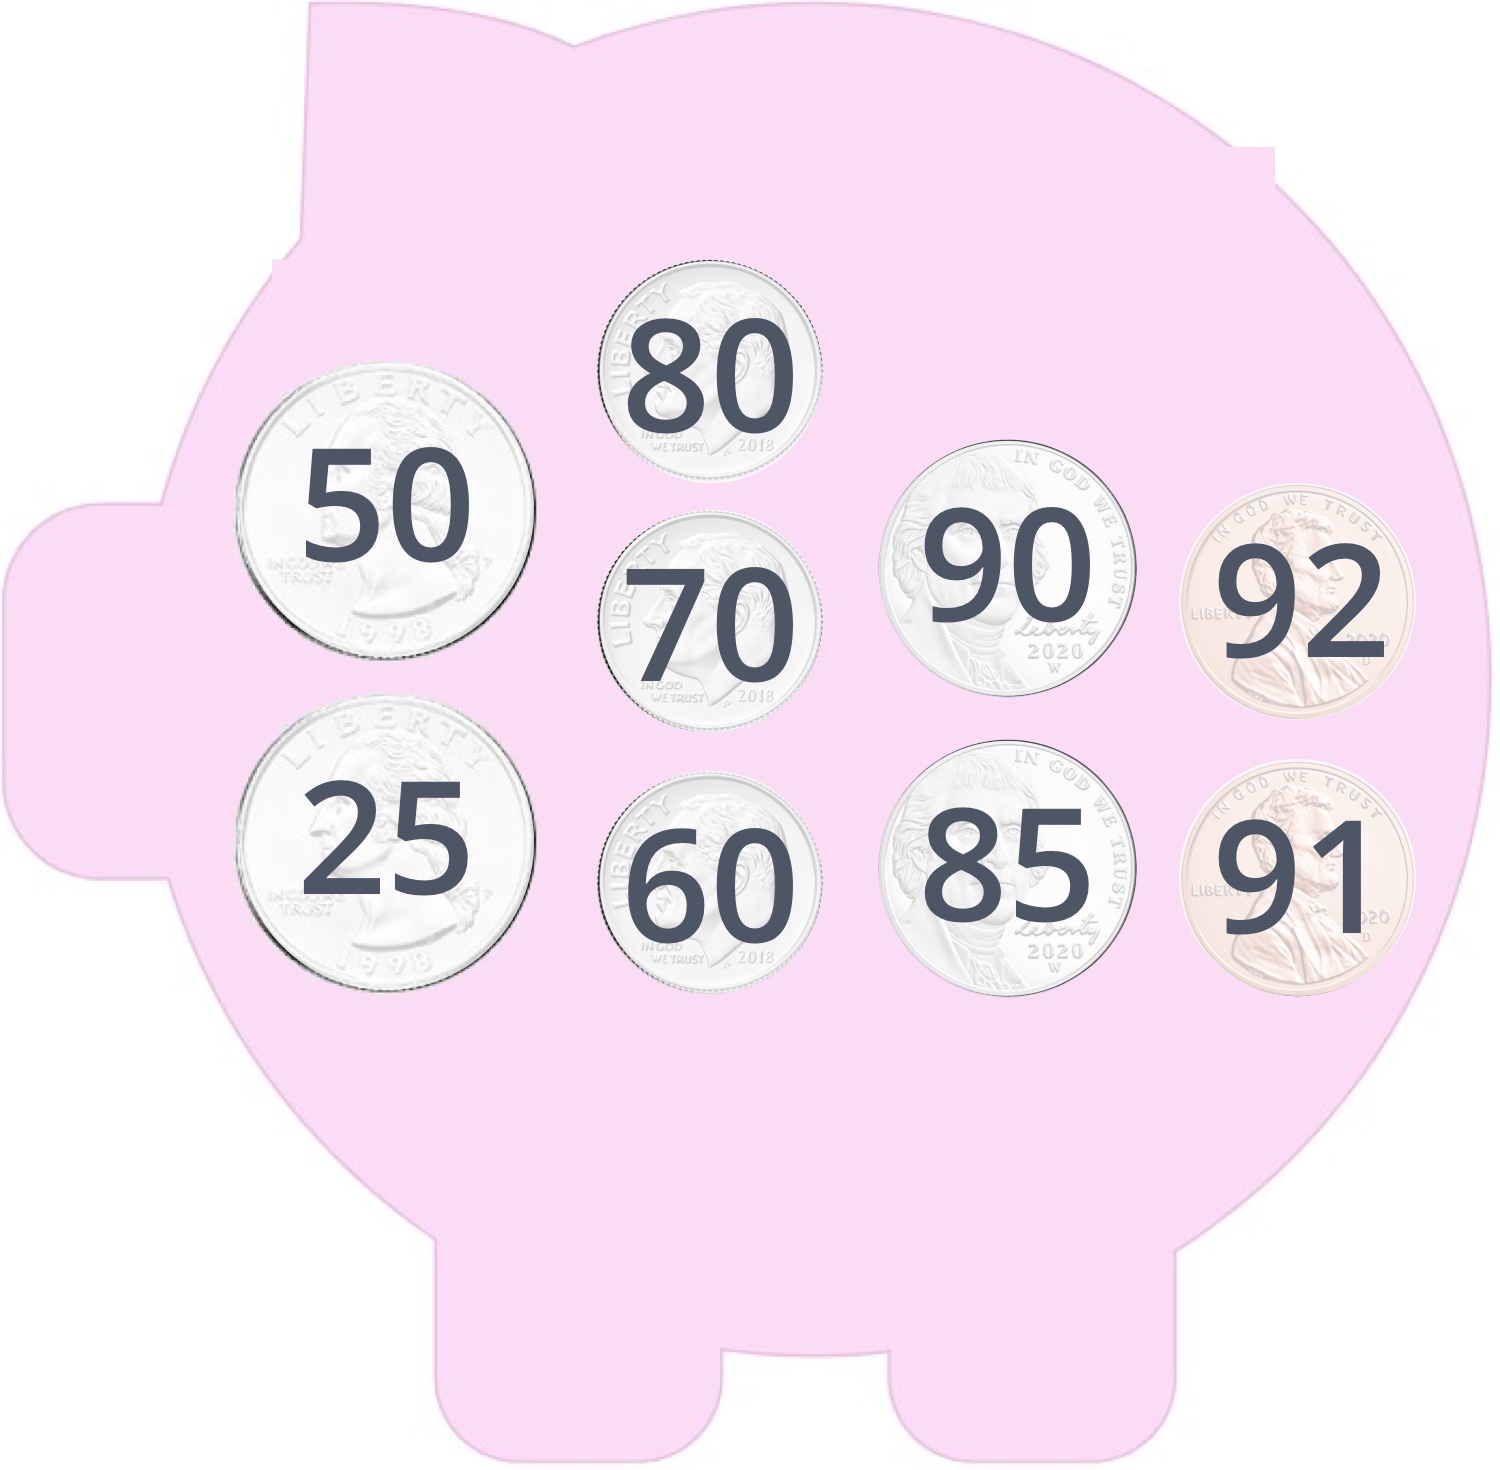 Piggy bank with coin values skip counting